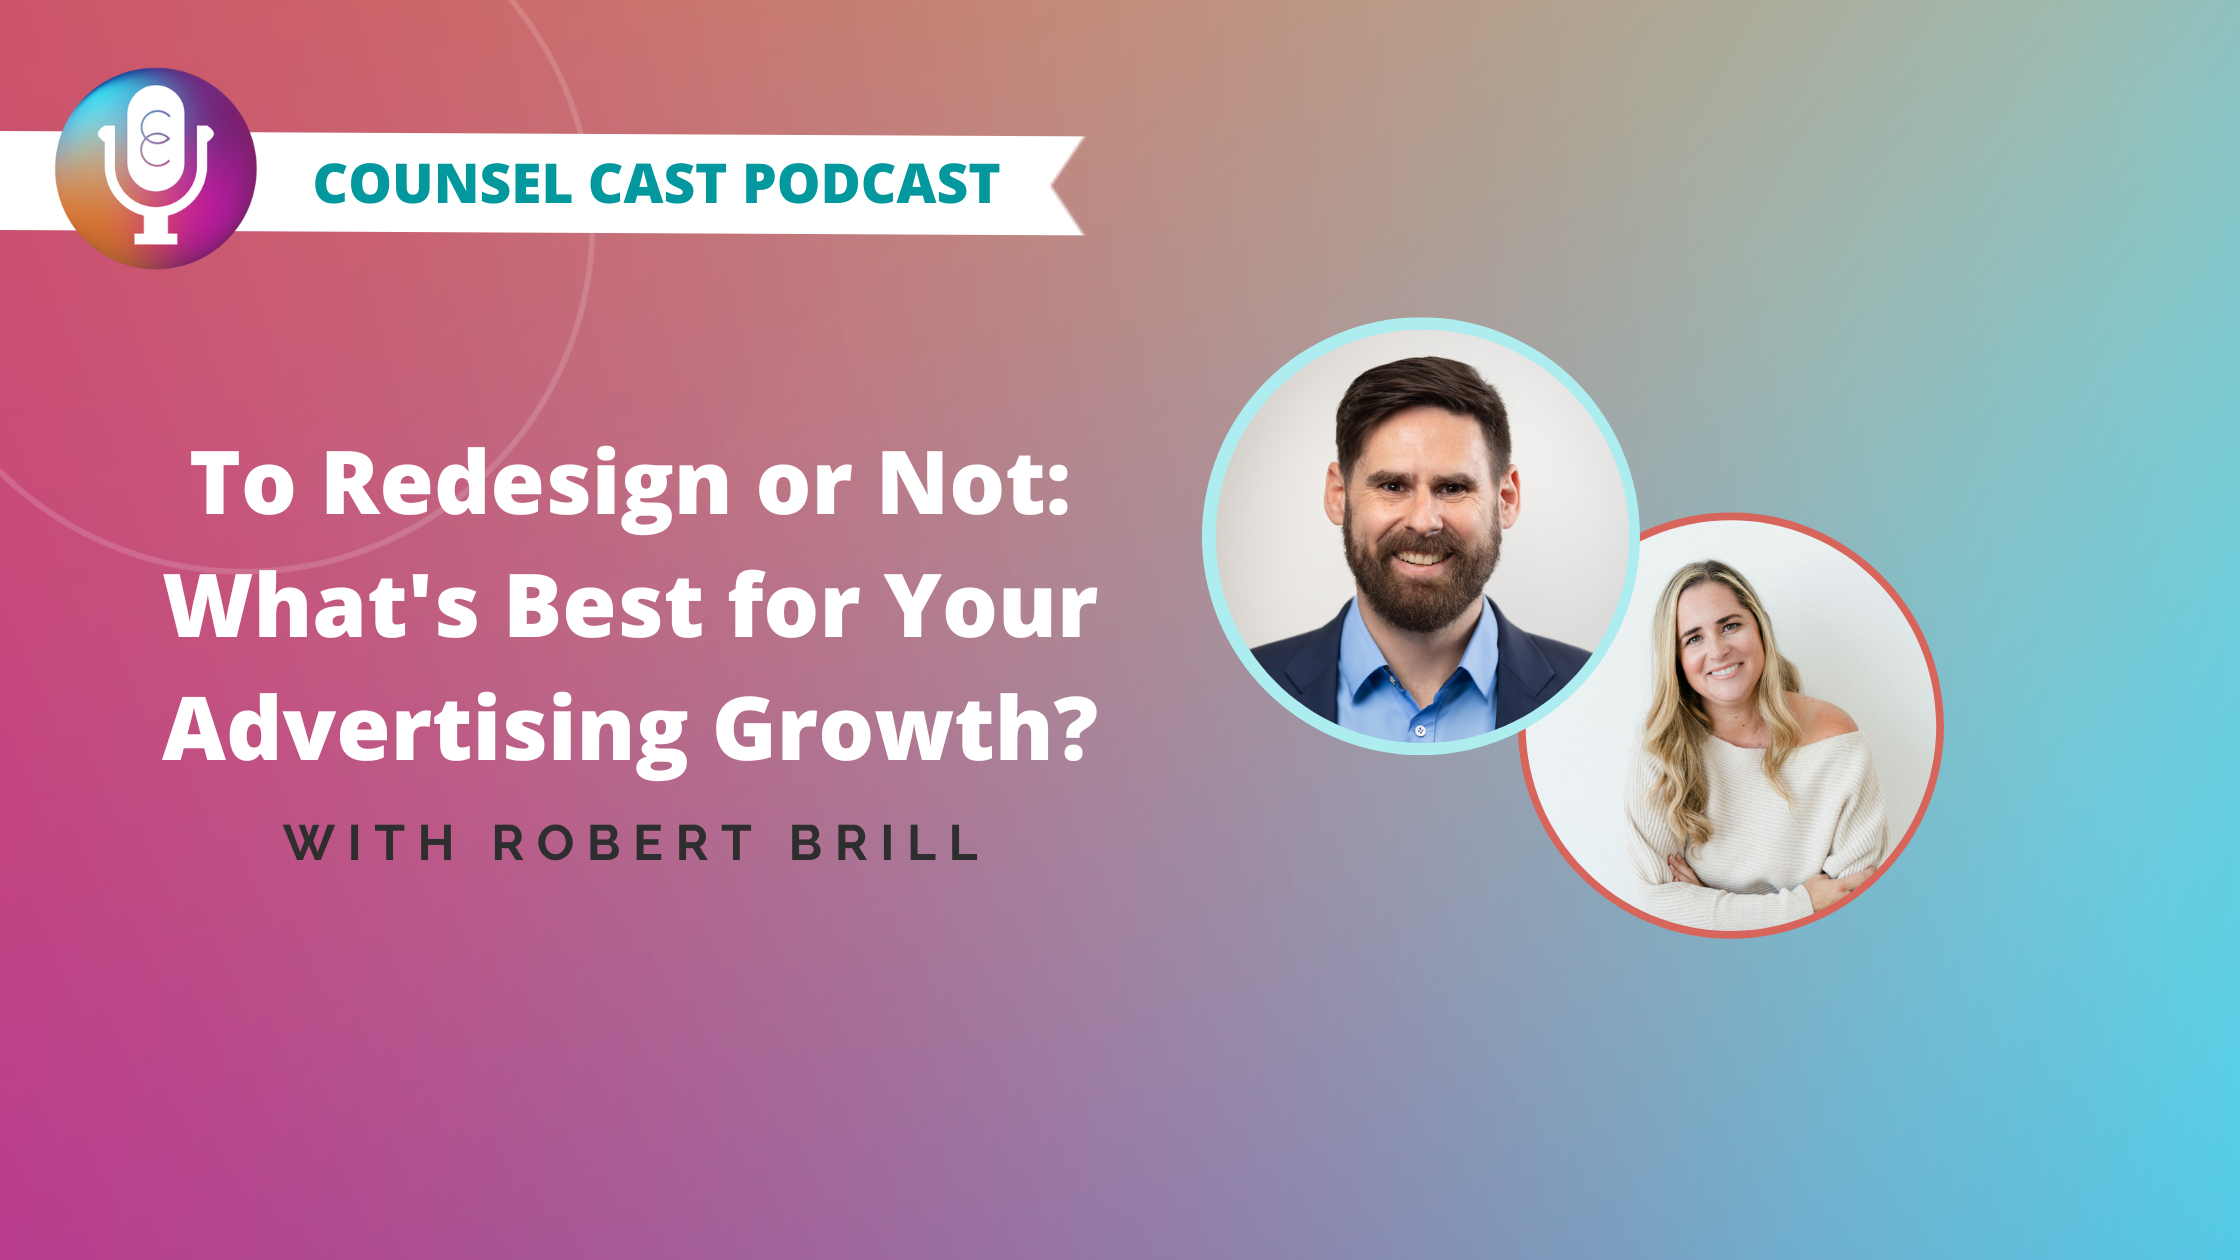 New Podcast Episode: To Redesign or Not: What's Best for Your Advertising Growth? with Robert Brill